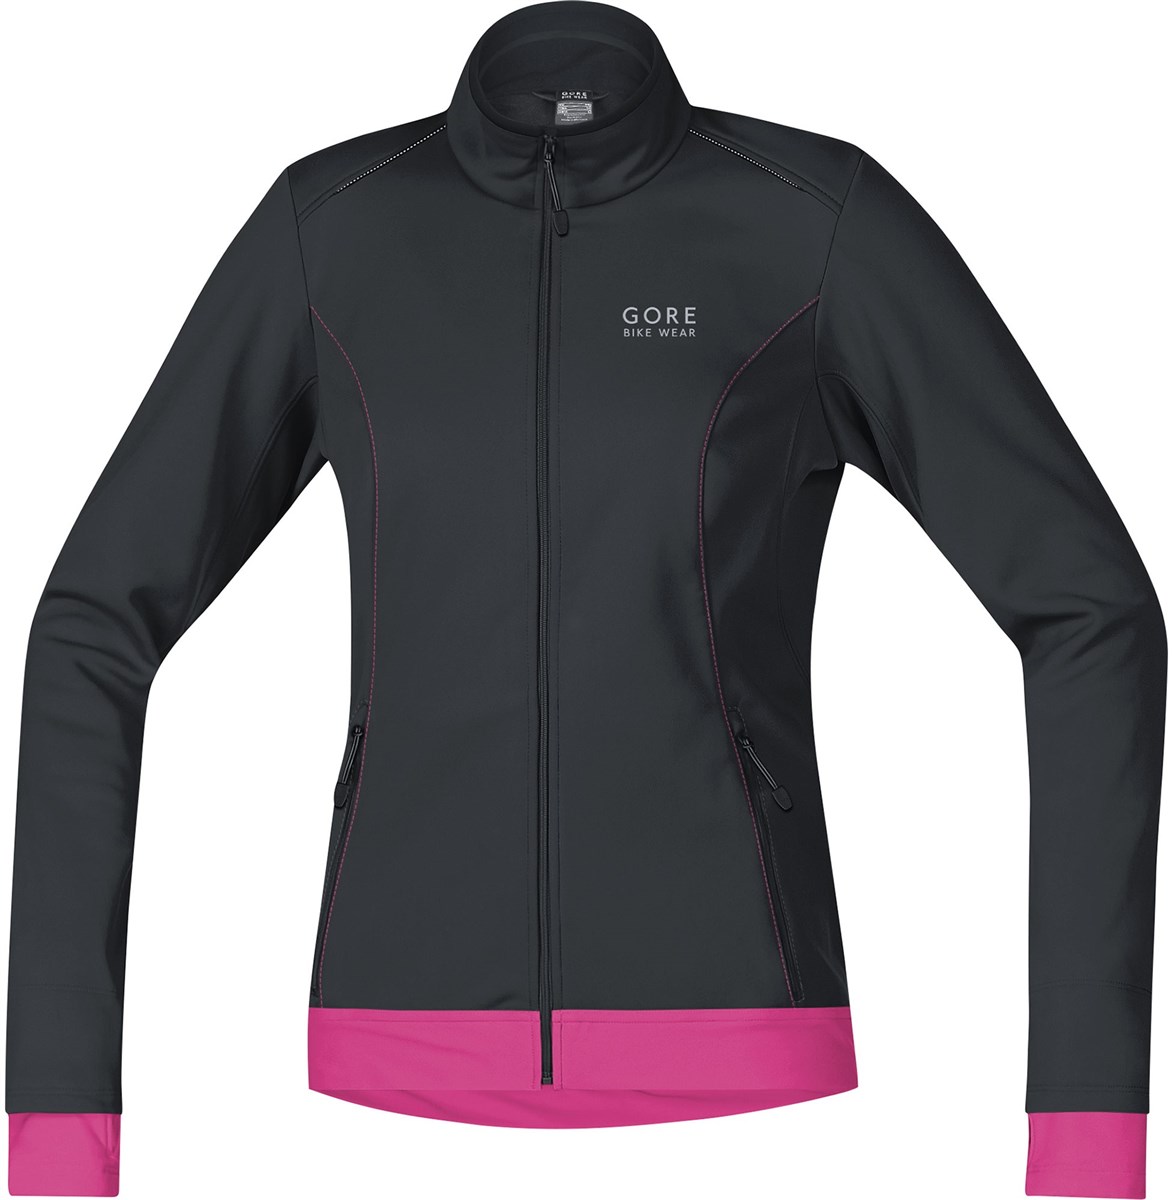 Gore E Windstopper Womens Soft Shell Jacket AW17 product image